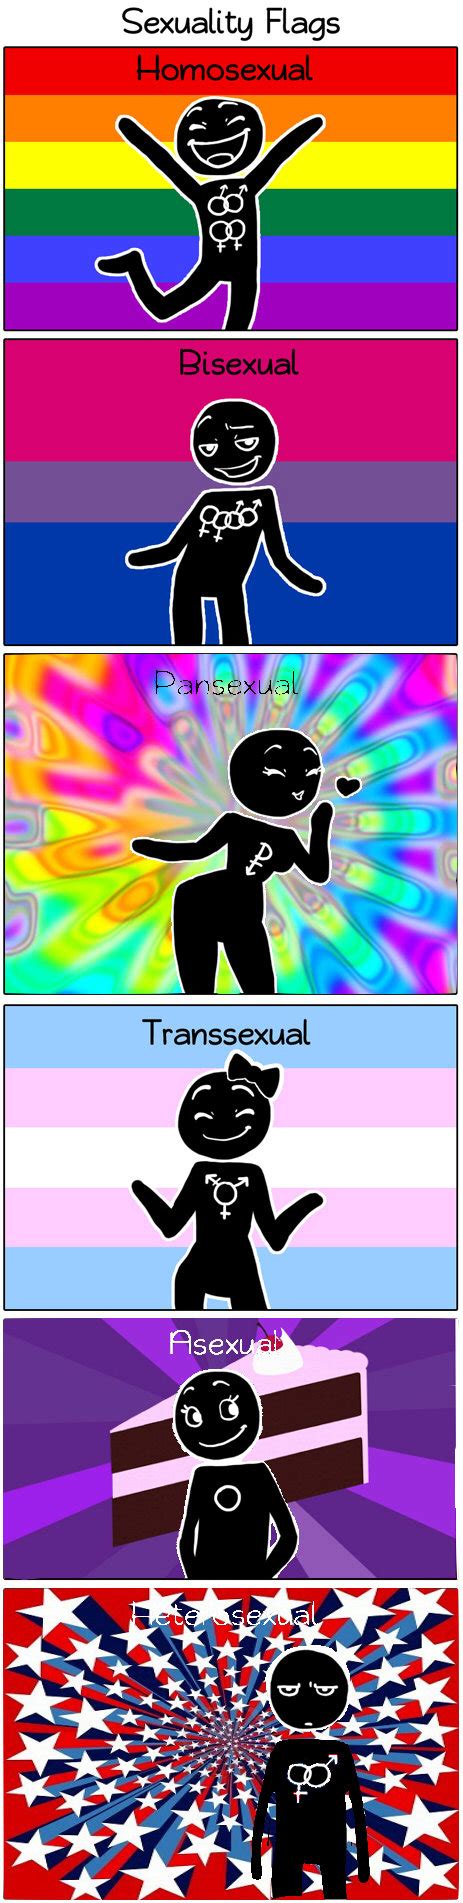 Sexuality Flags Fixed